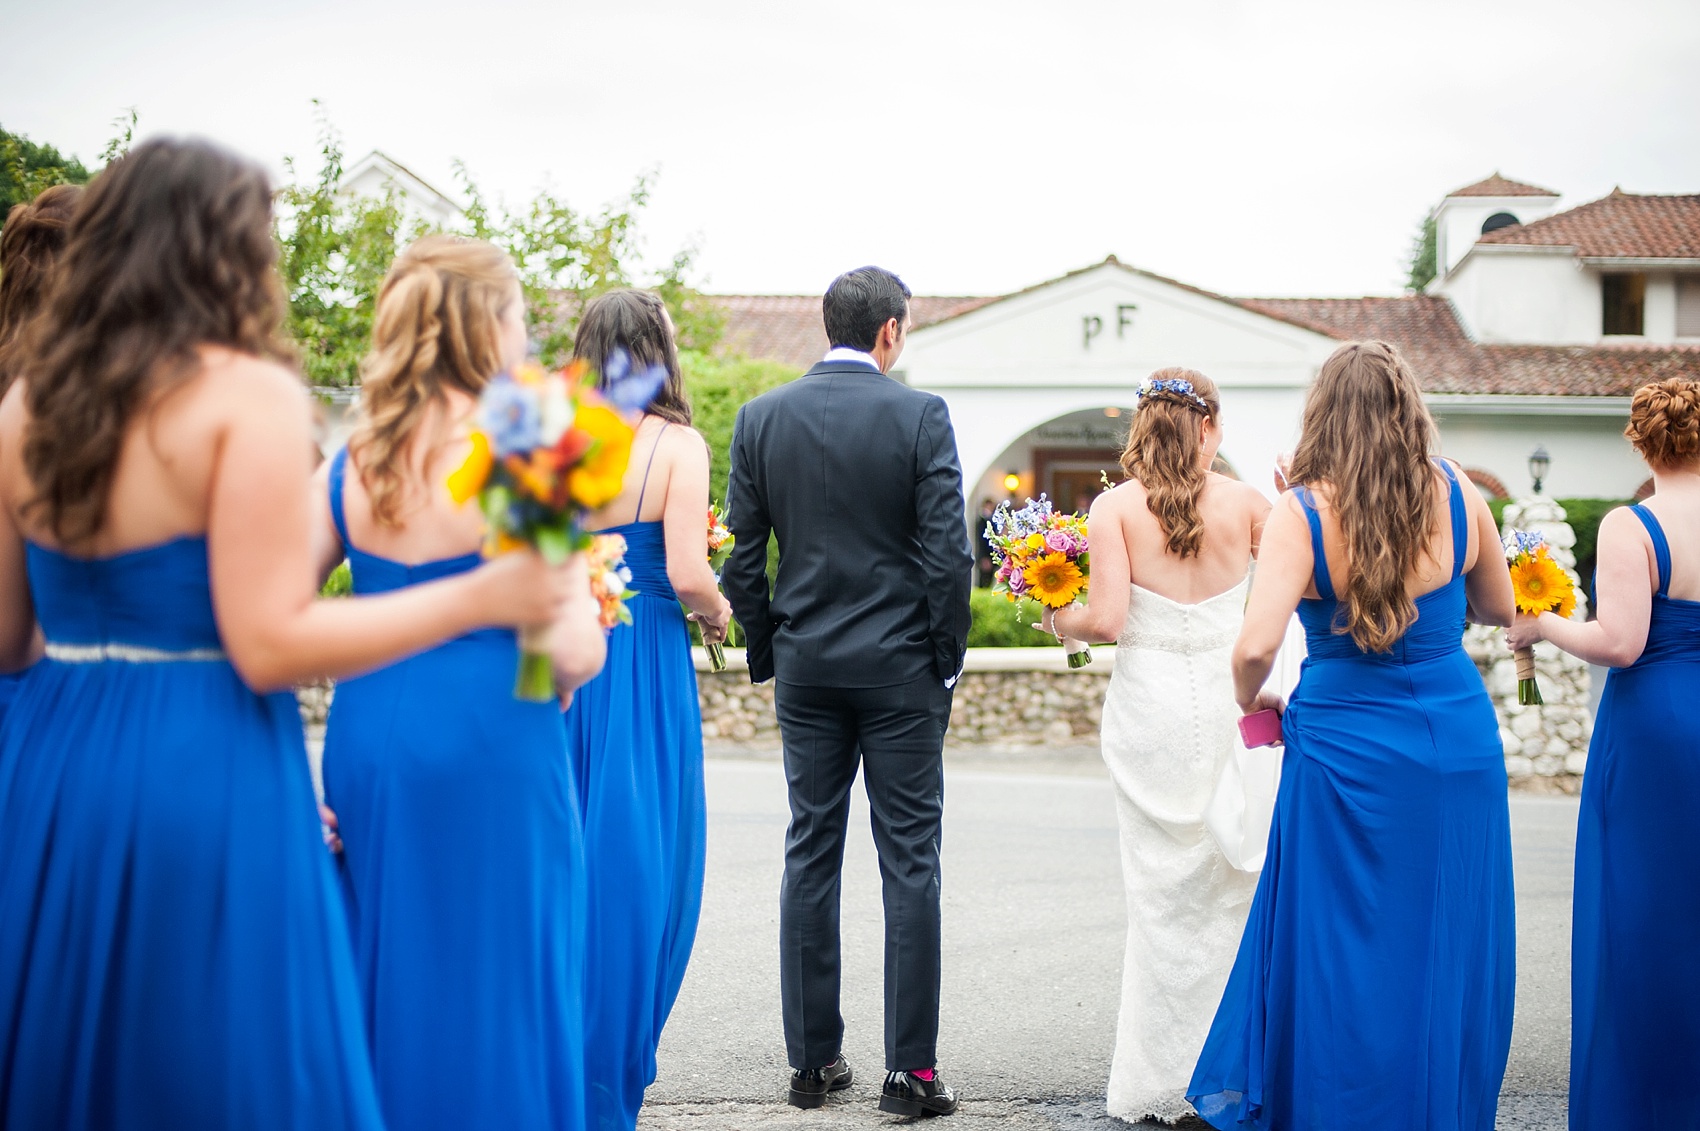 Perona Farms wedding photos cobalt blue bridesmaids for a colorful summer celebration. Pictures by New Jersey photographer Mikkel Paige Photography.